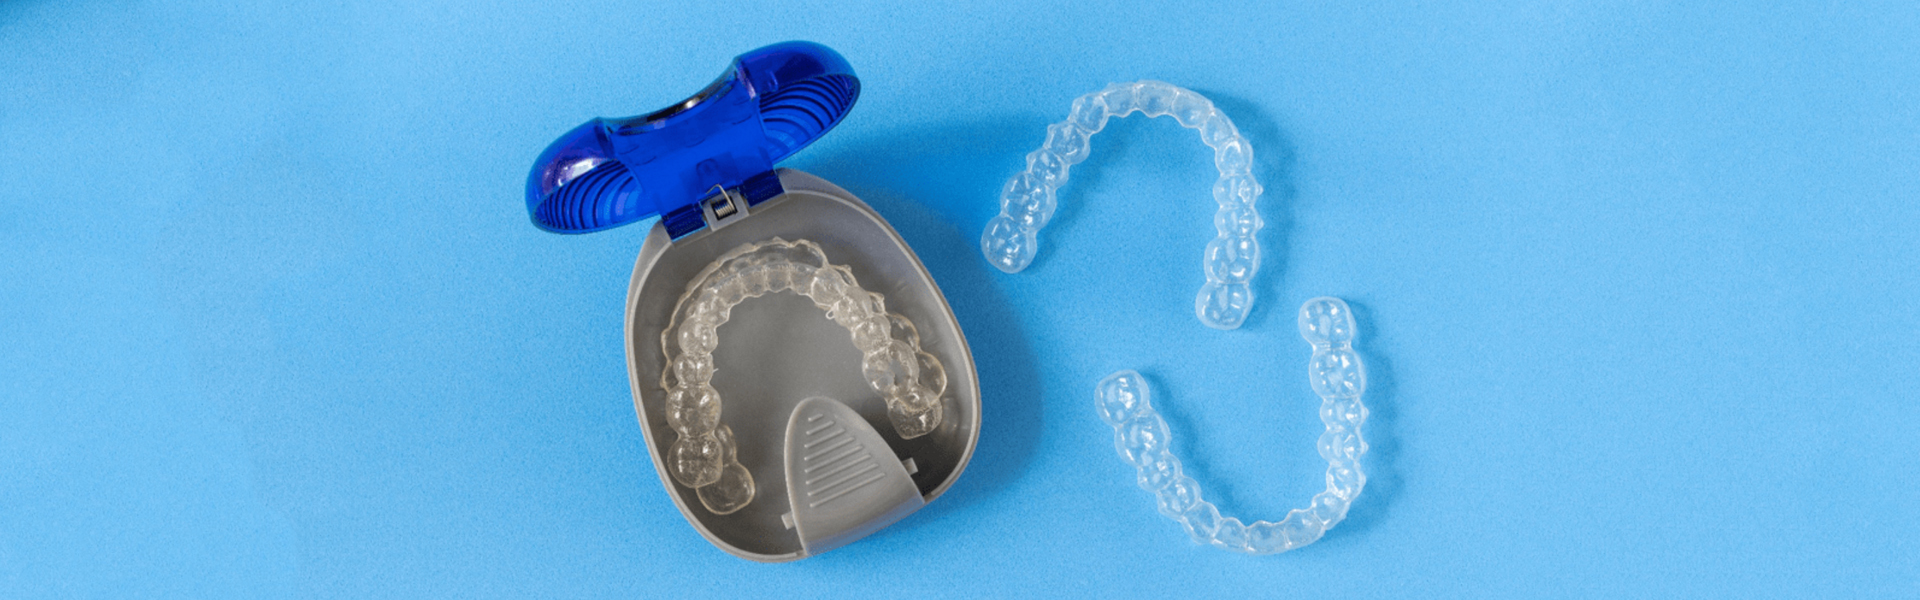 Invisalign an Excellent Alternative to Correct Malocclusion with Braces without Metal